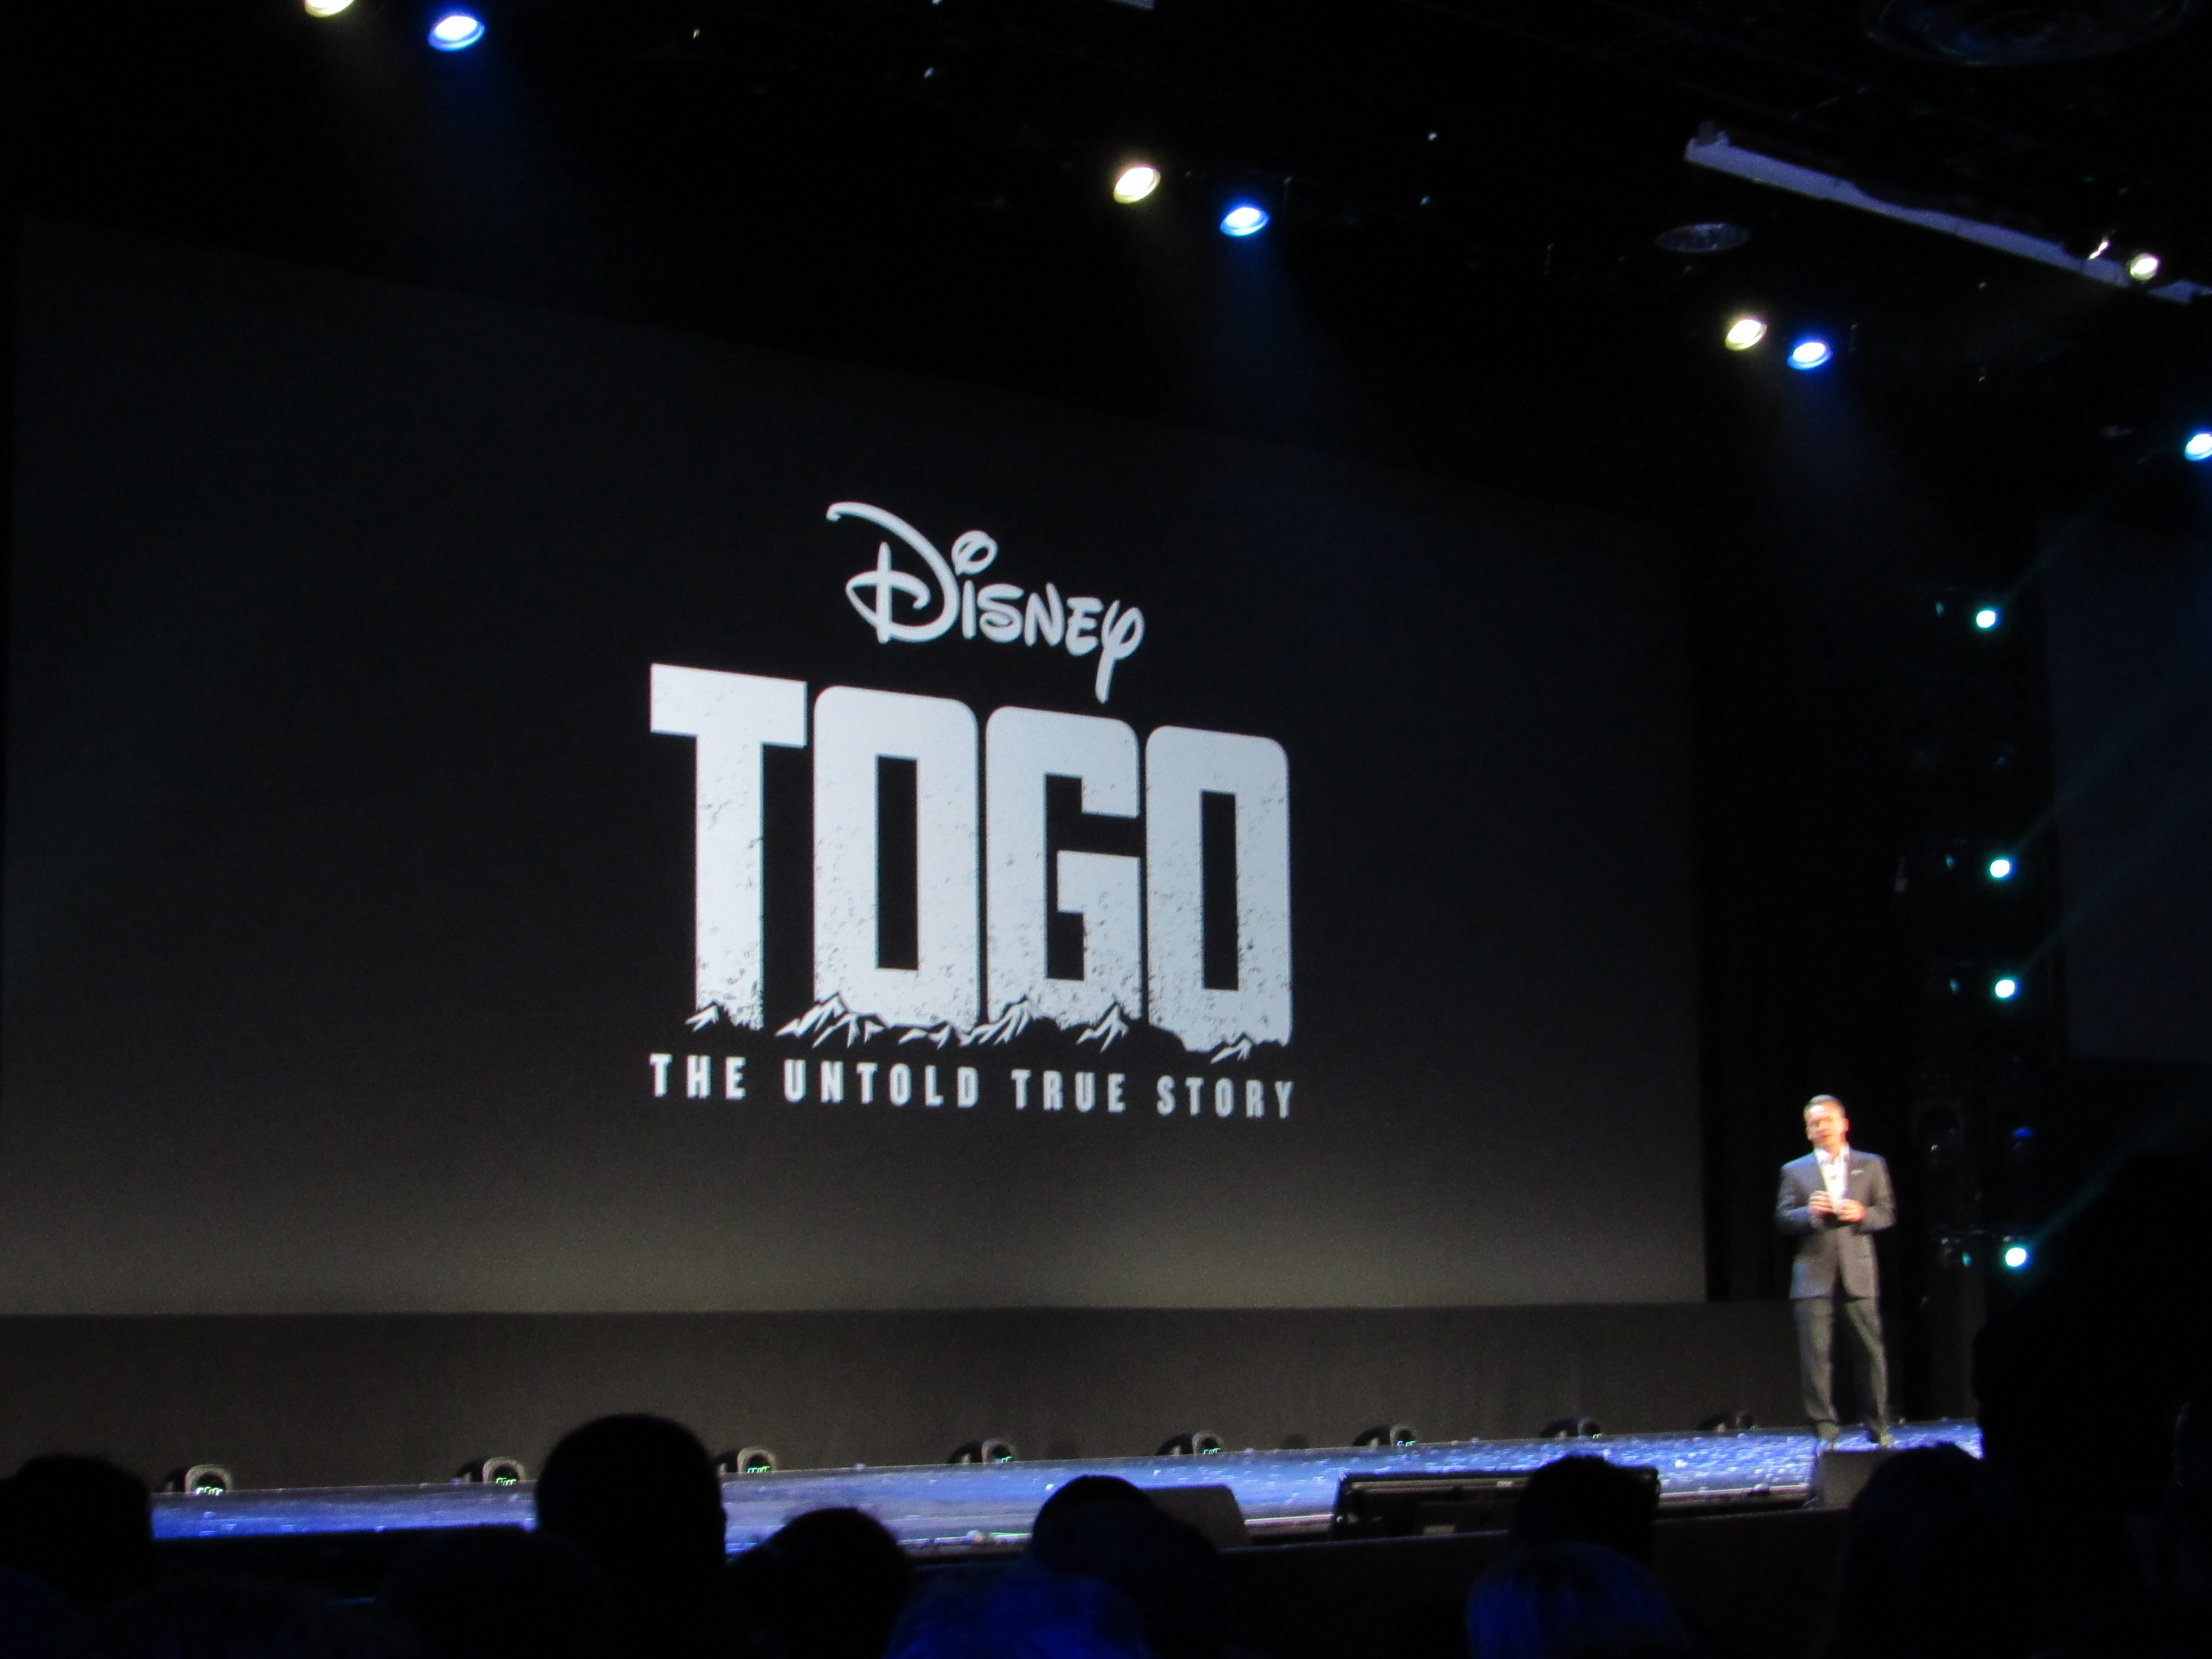 Togo: The Untold True Story at the D23 Expo 2019 Disney Plus panel